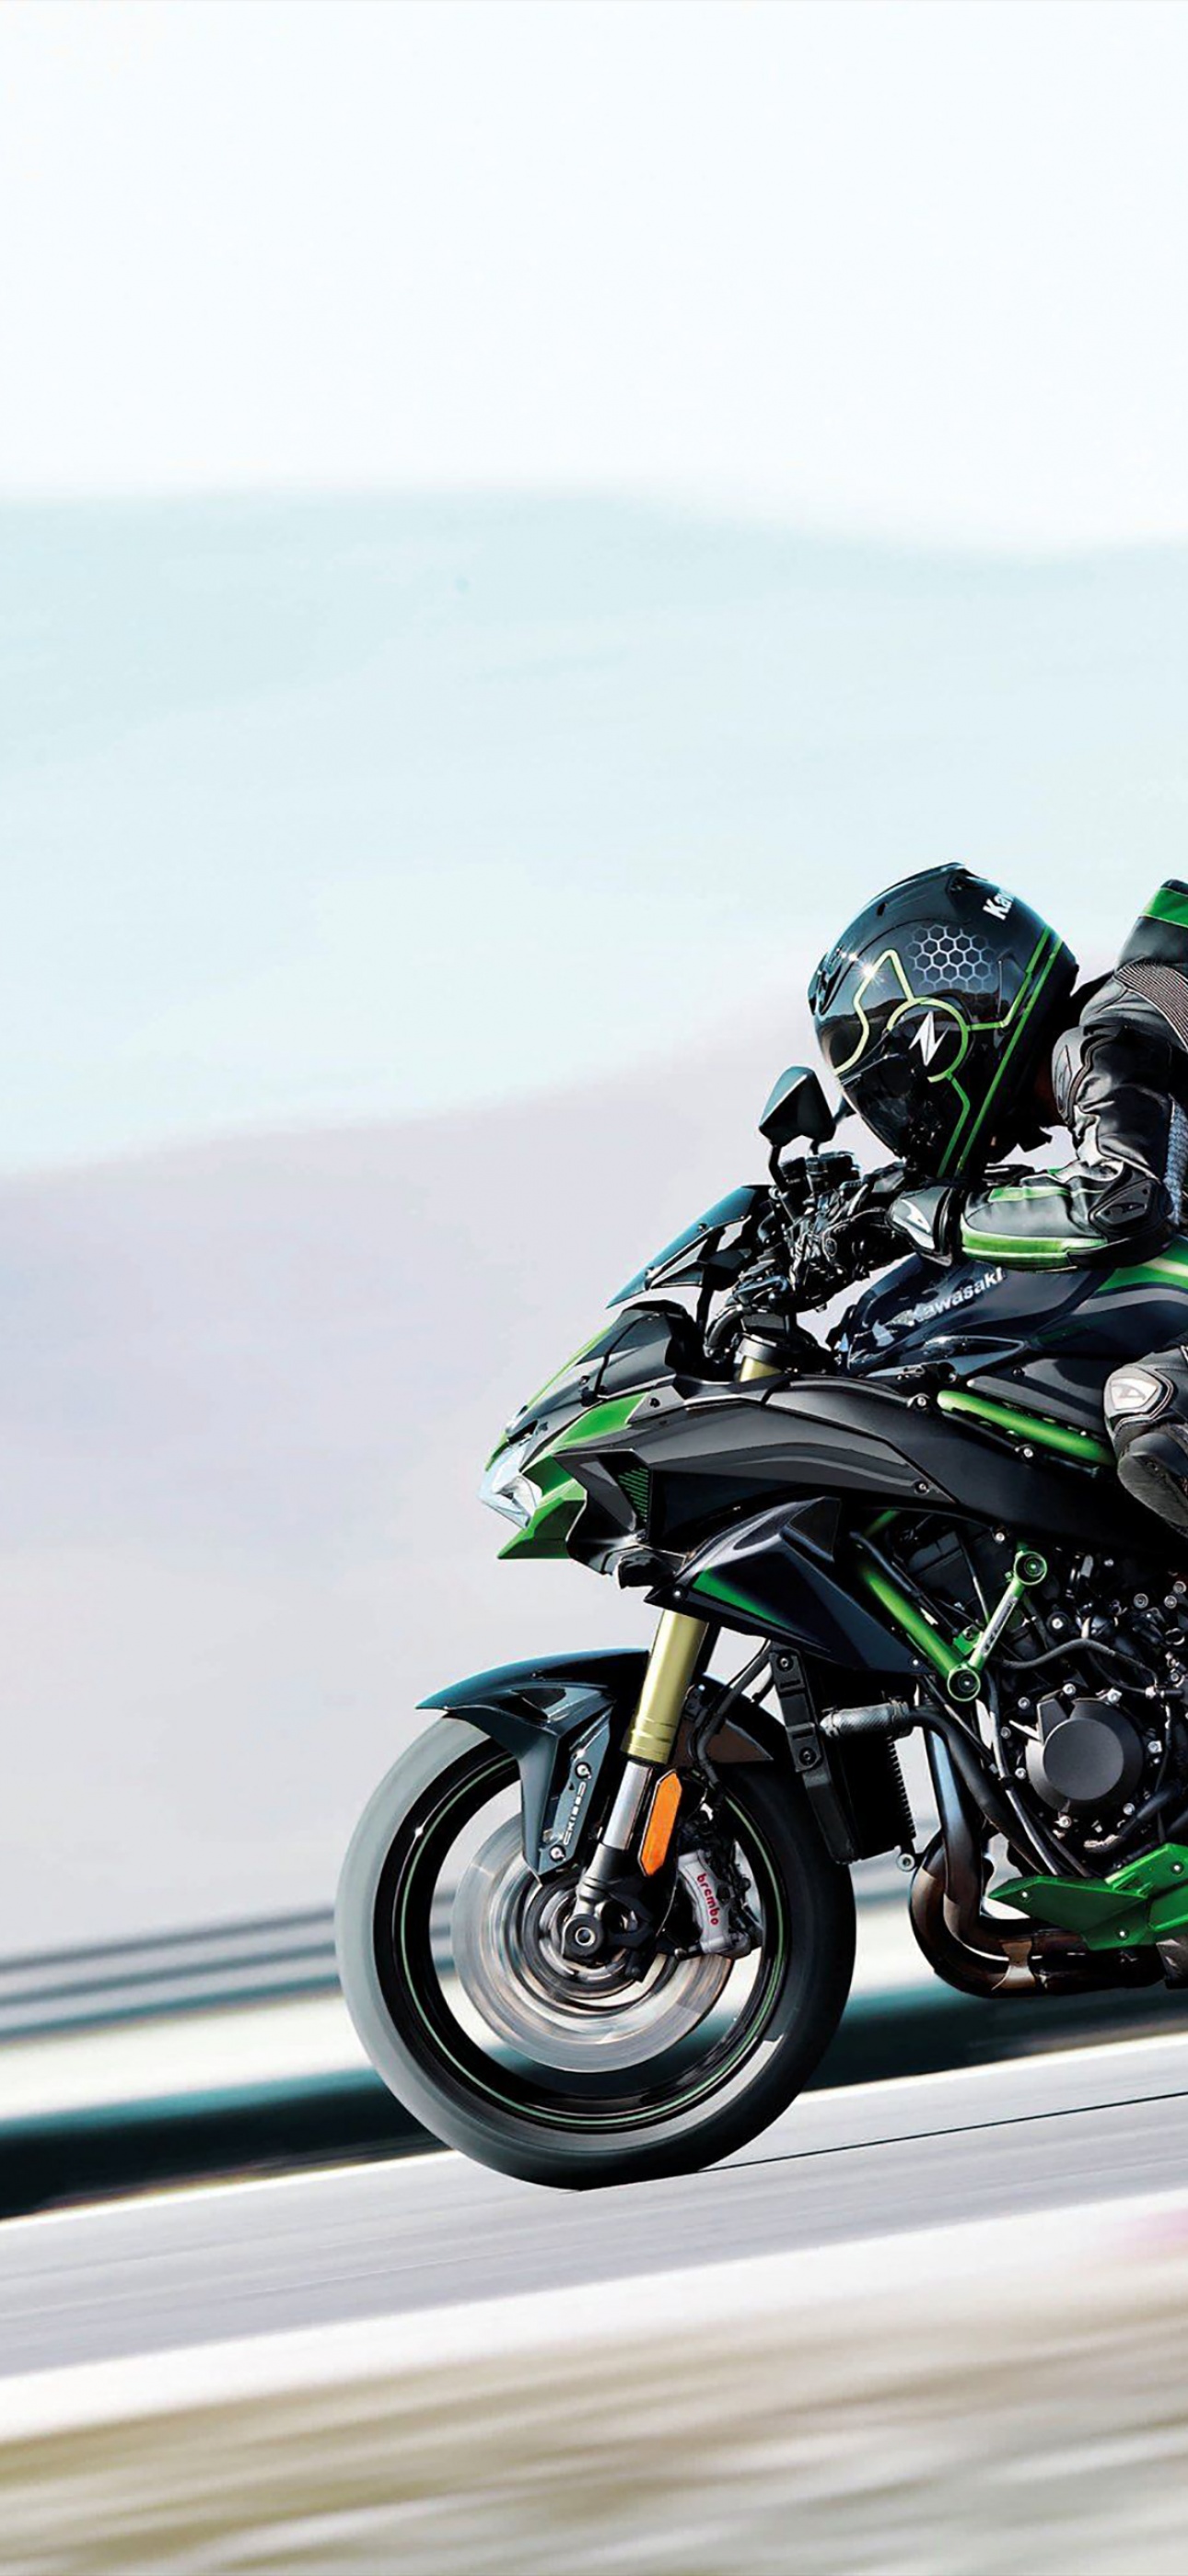 Kawasaki Ninja H2R Images, Colours, Price, Mileage, and Booking Details